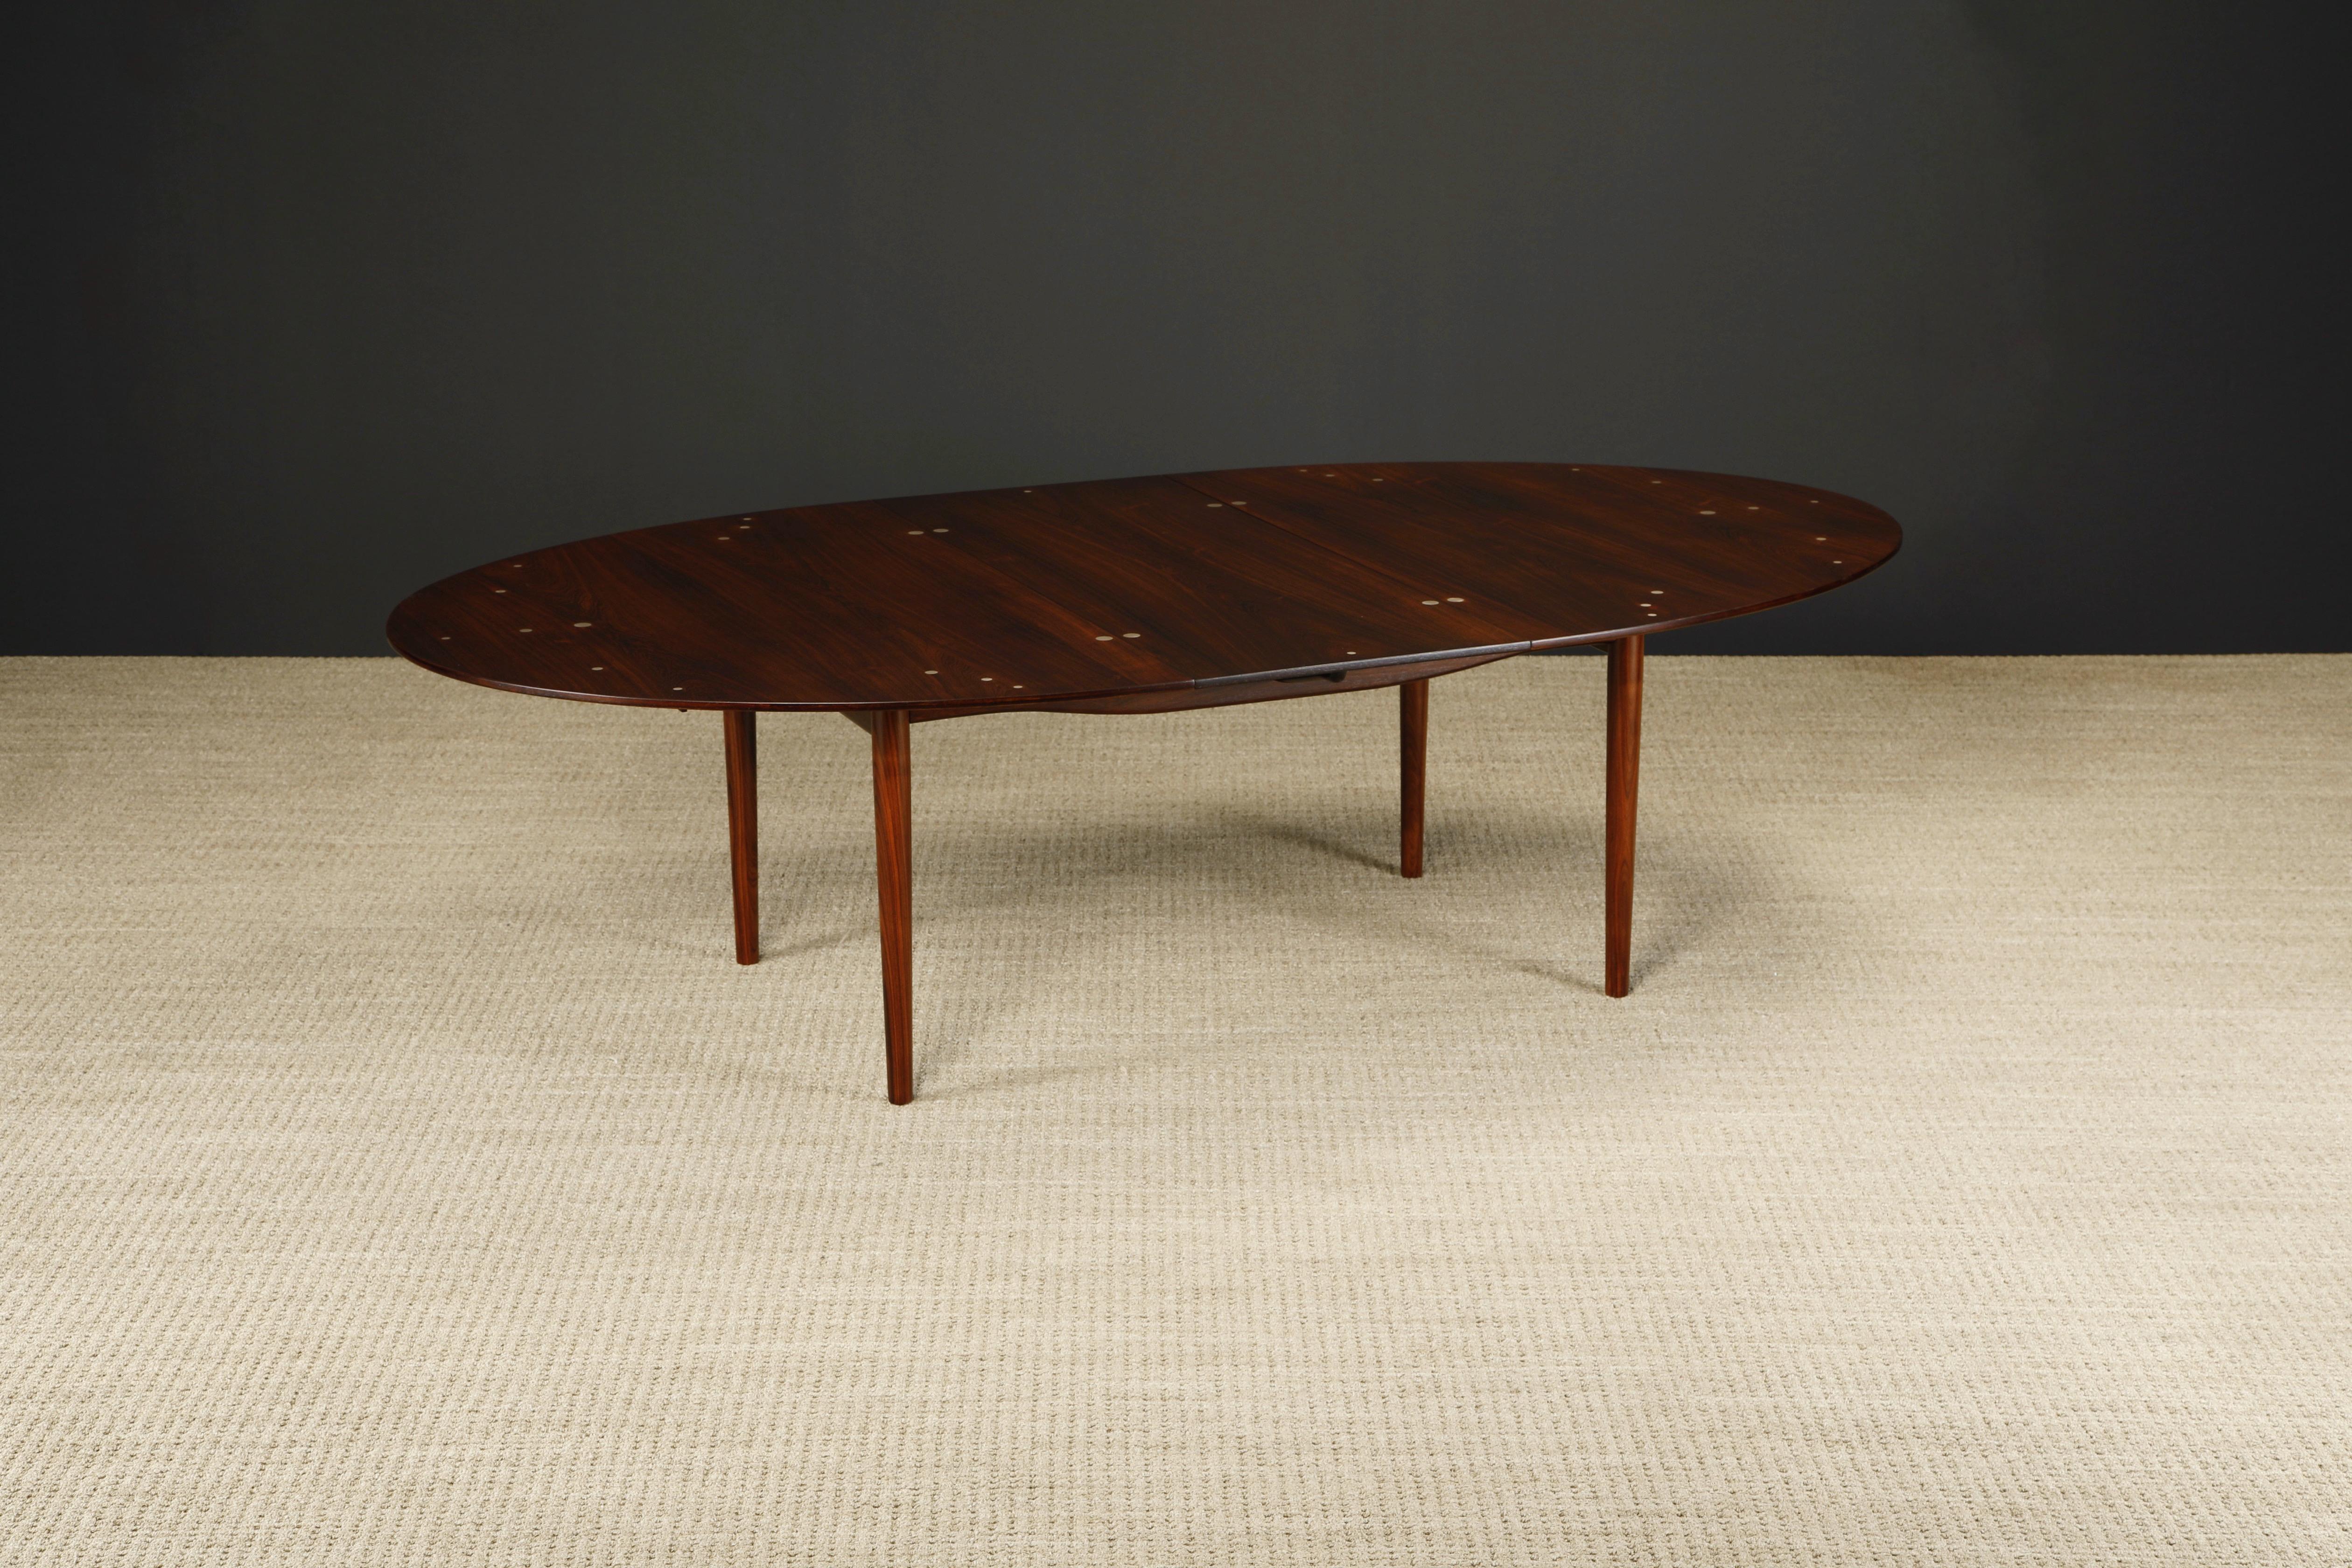 Finn Juhl 'Judas' Rosewood and Sterling Silver Dining Table, c 1950s, Signed For Sale 1